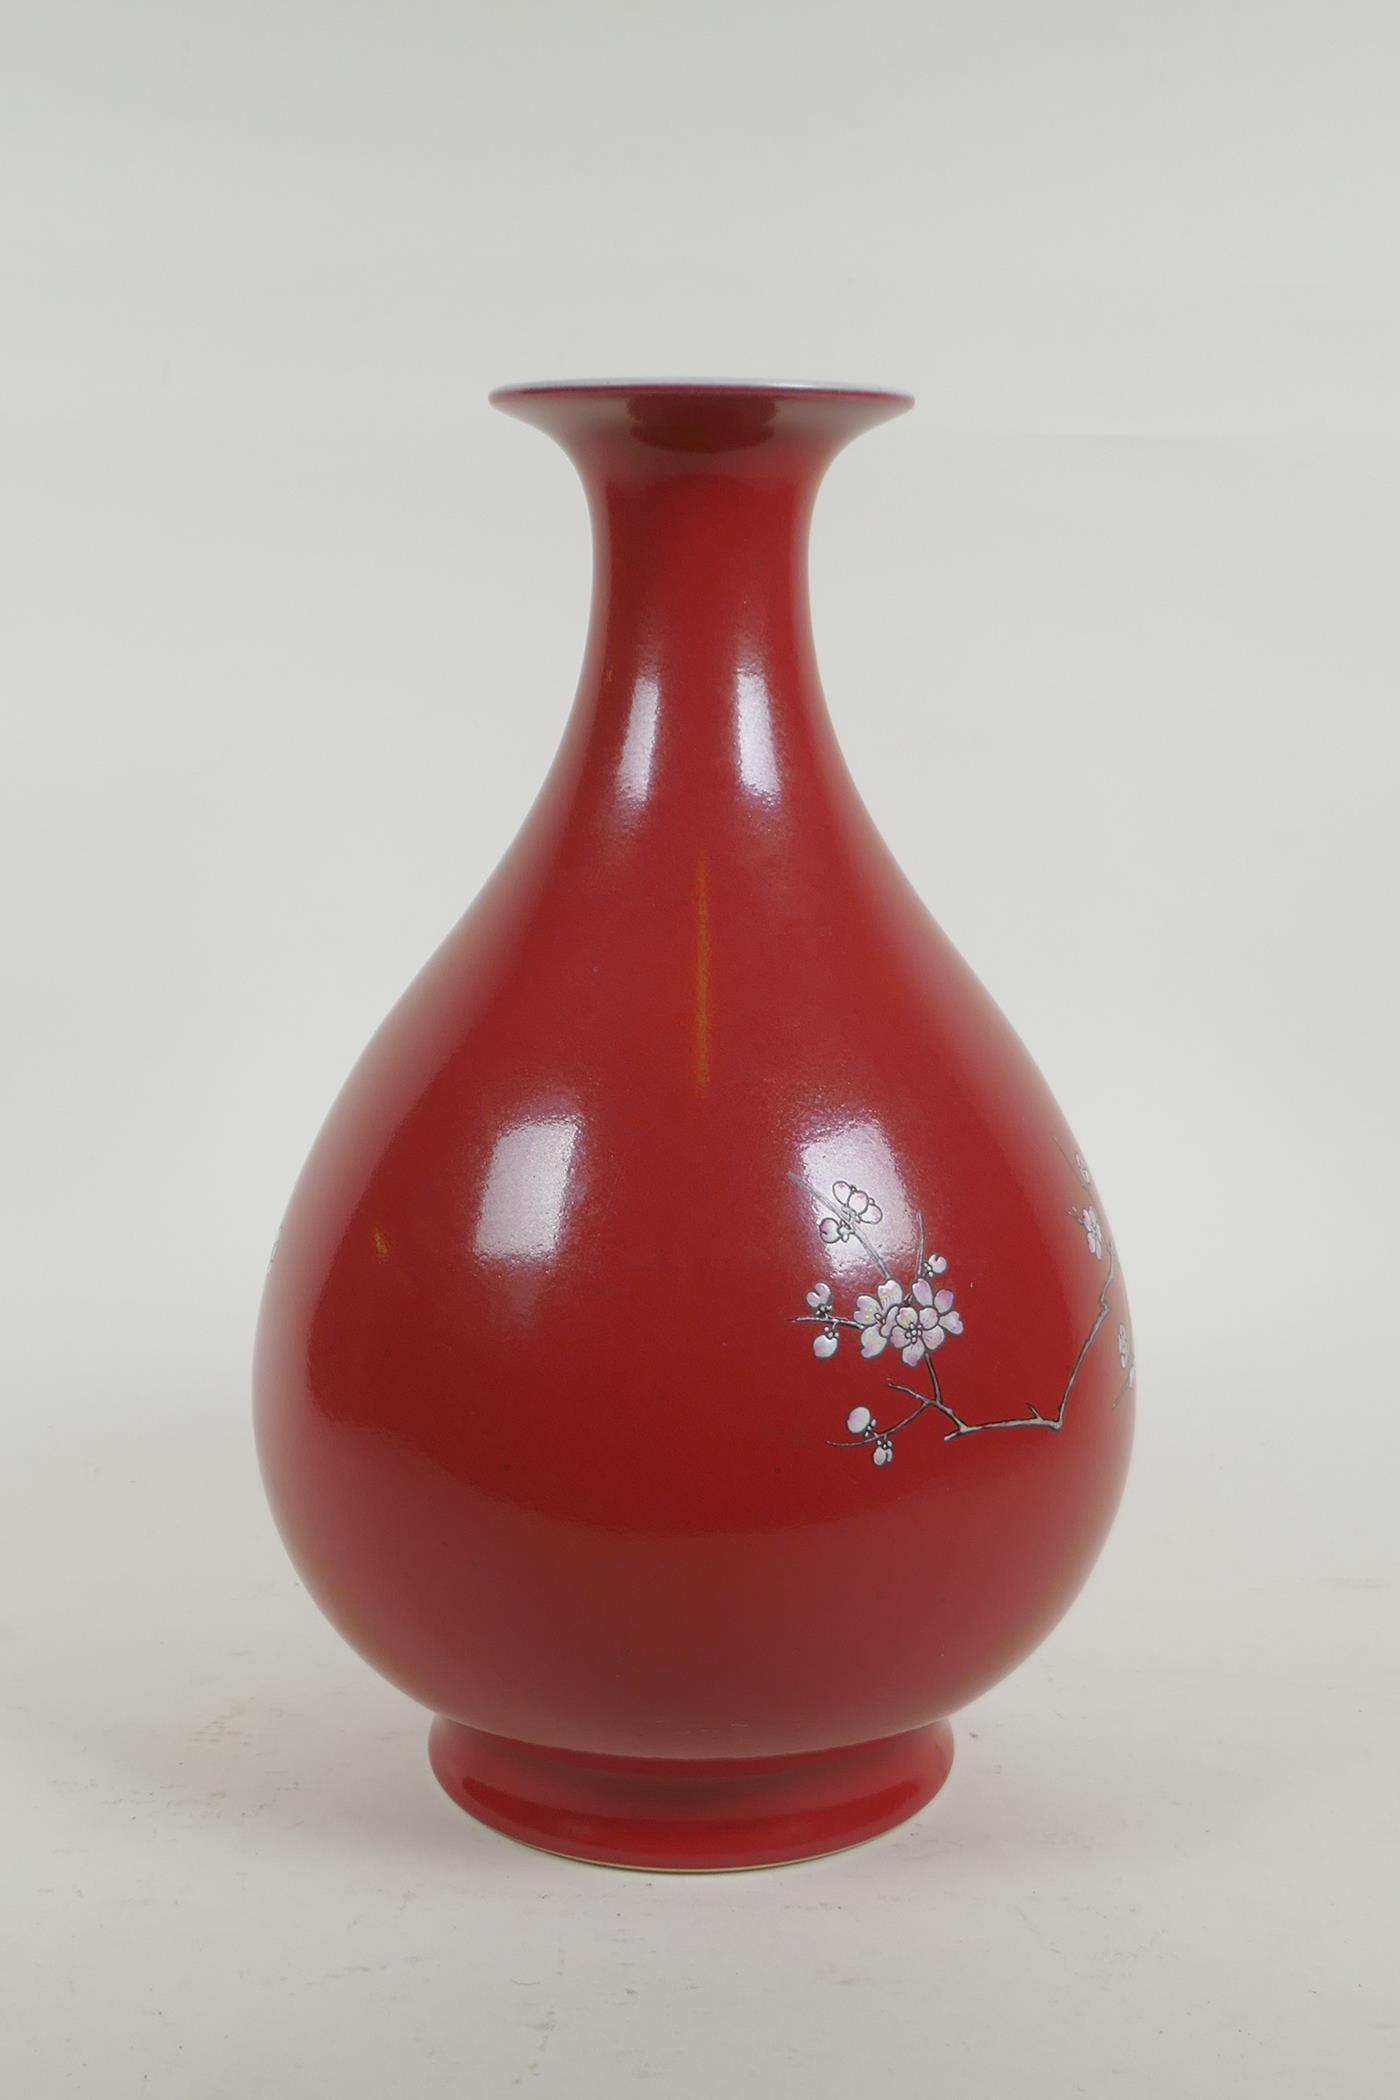 An C18th Chinese Yuhuchunping (pear shaped) porcelain vase, with enamel prunus blossom tree - Image 5 of 11